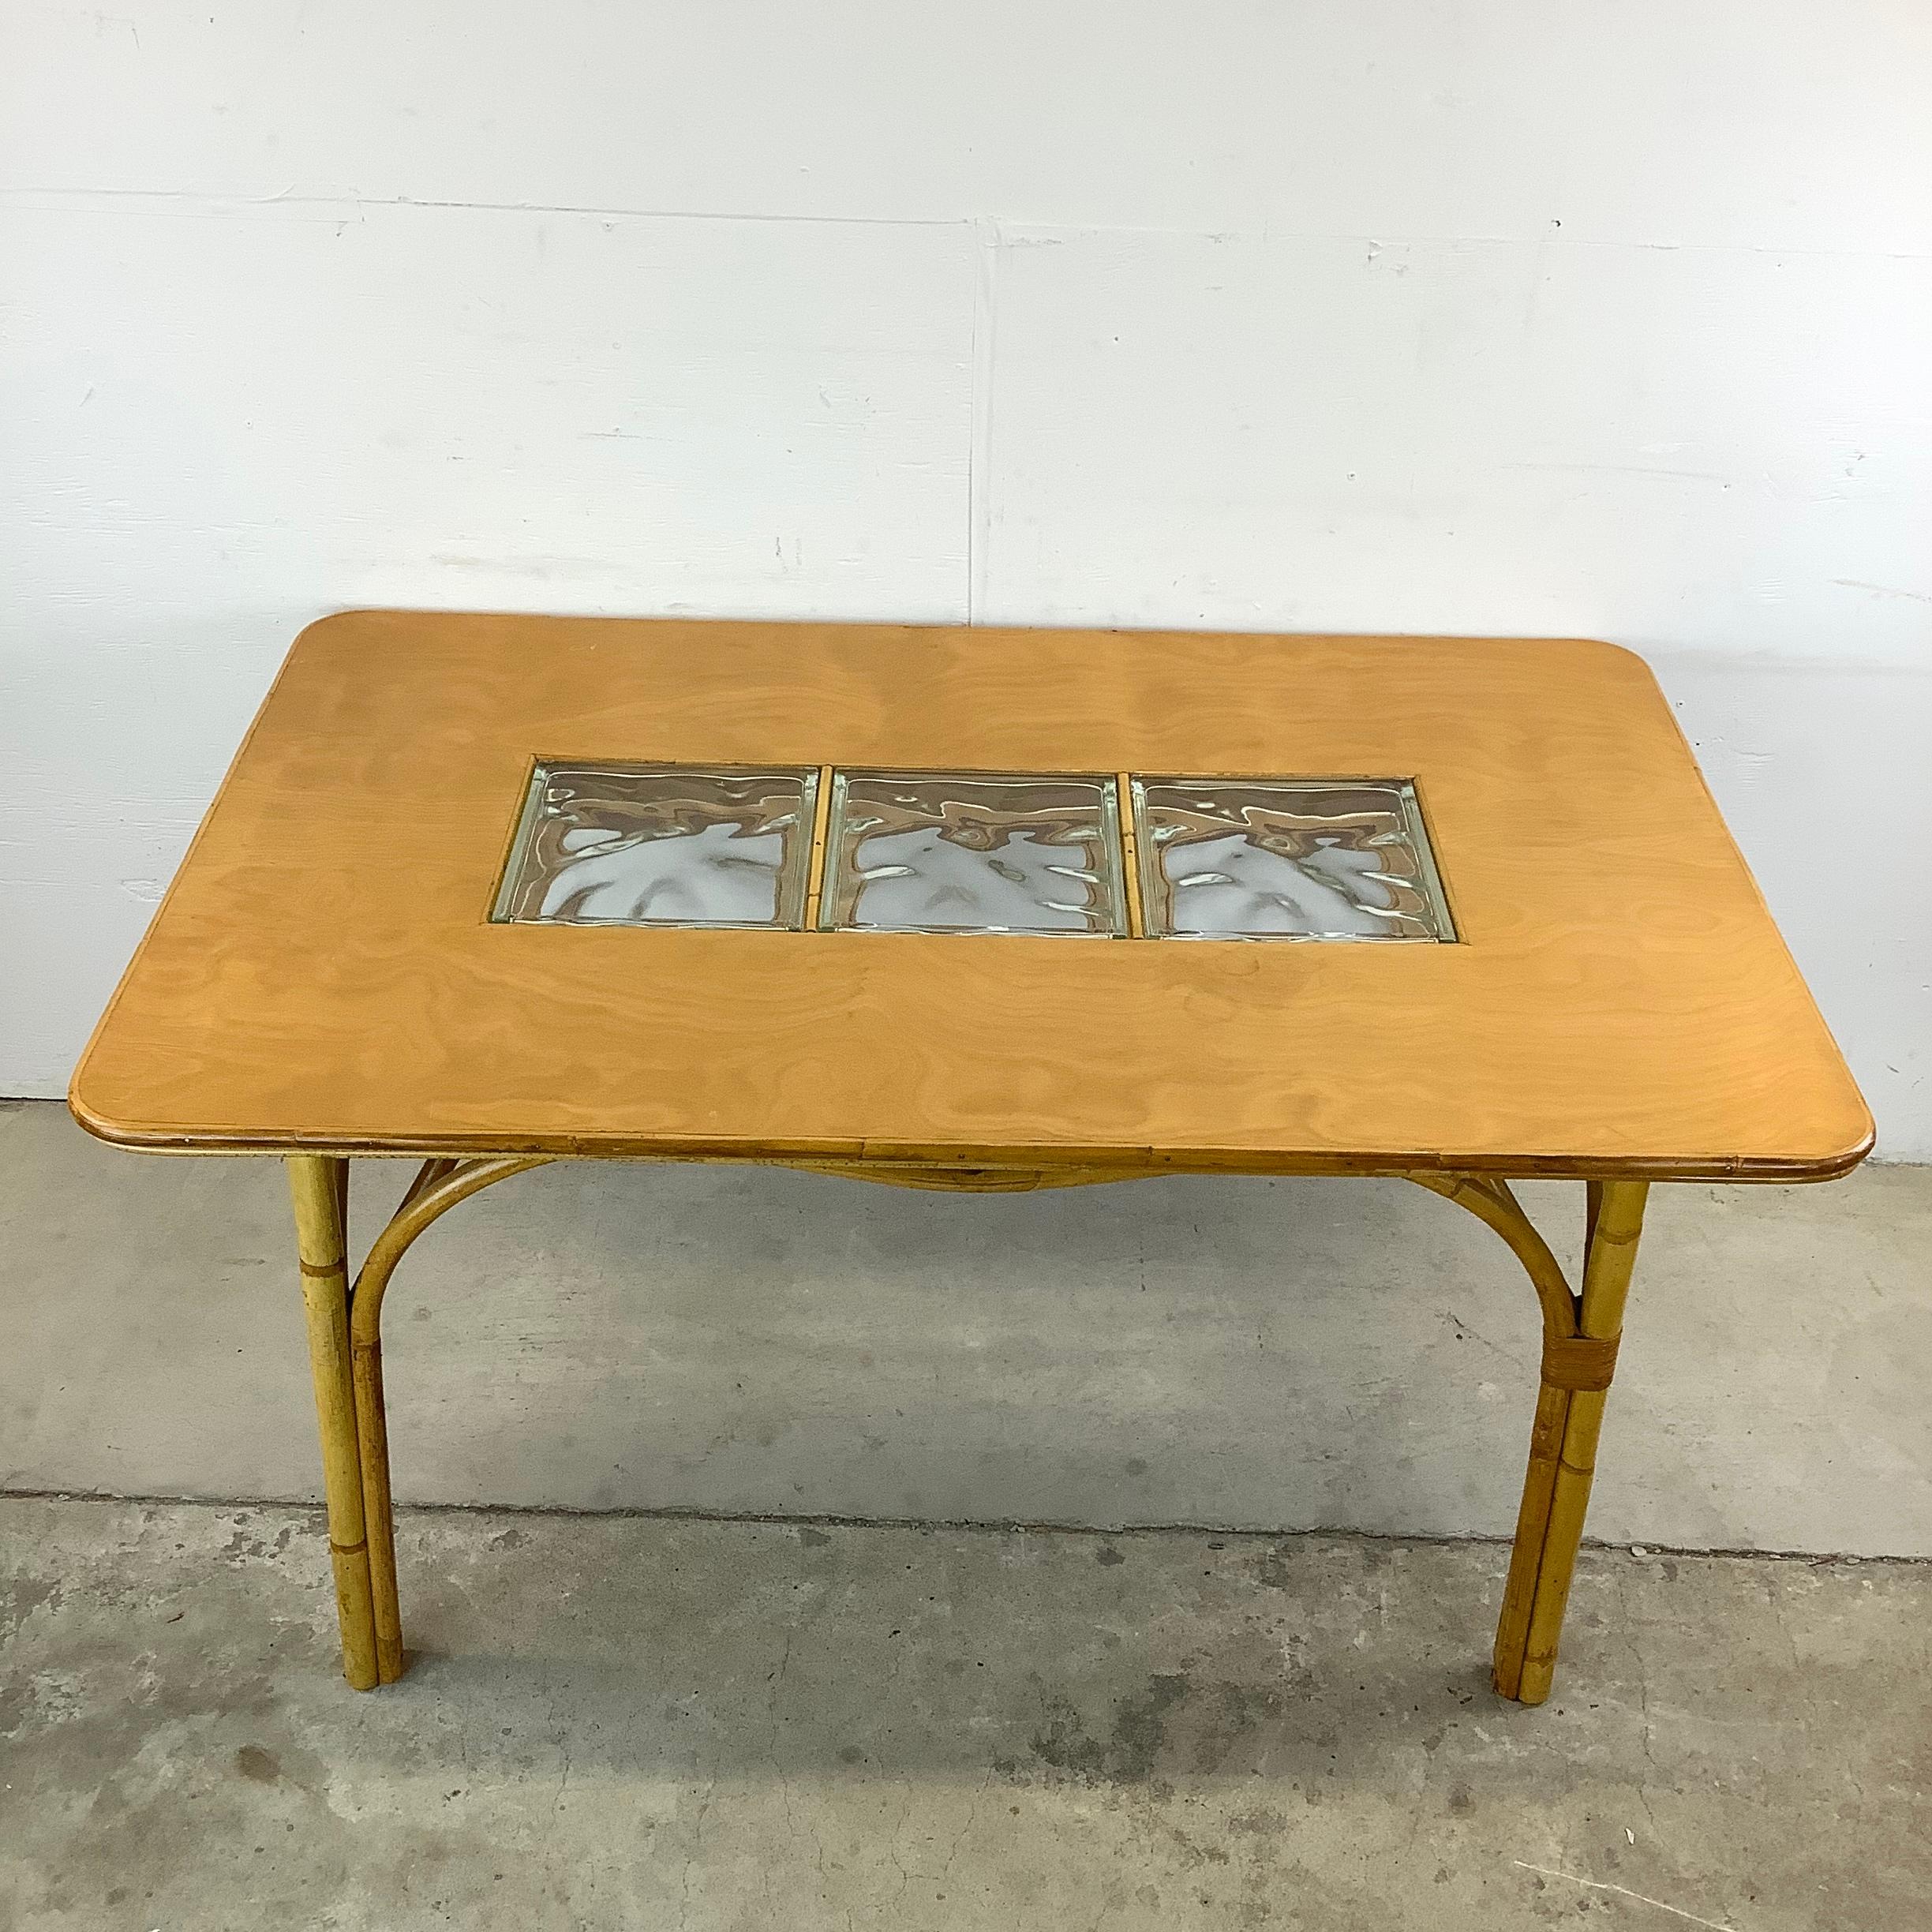 20th Century Vintage Modern Bamboo Dining Table With Glass Inserts For Sale